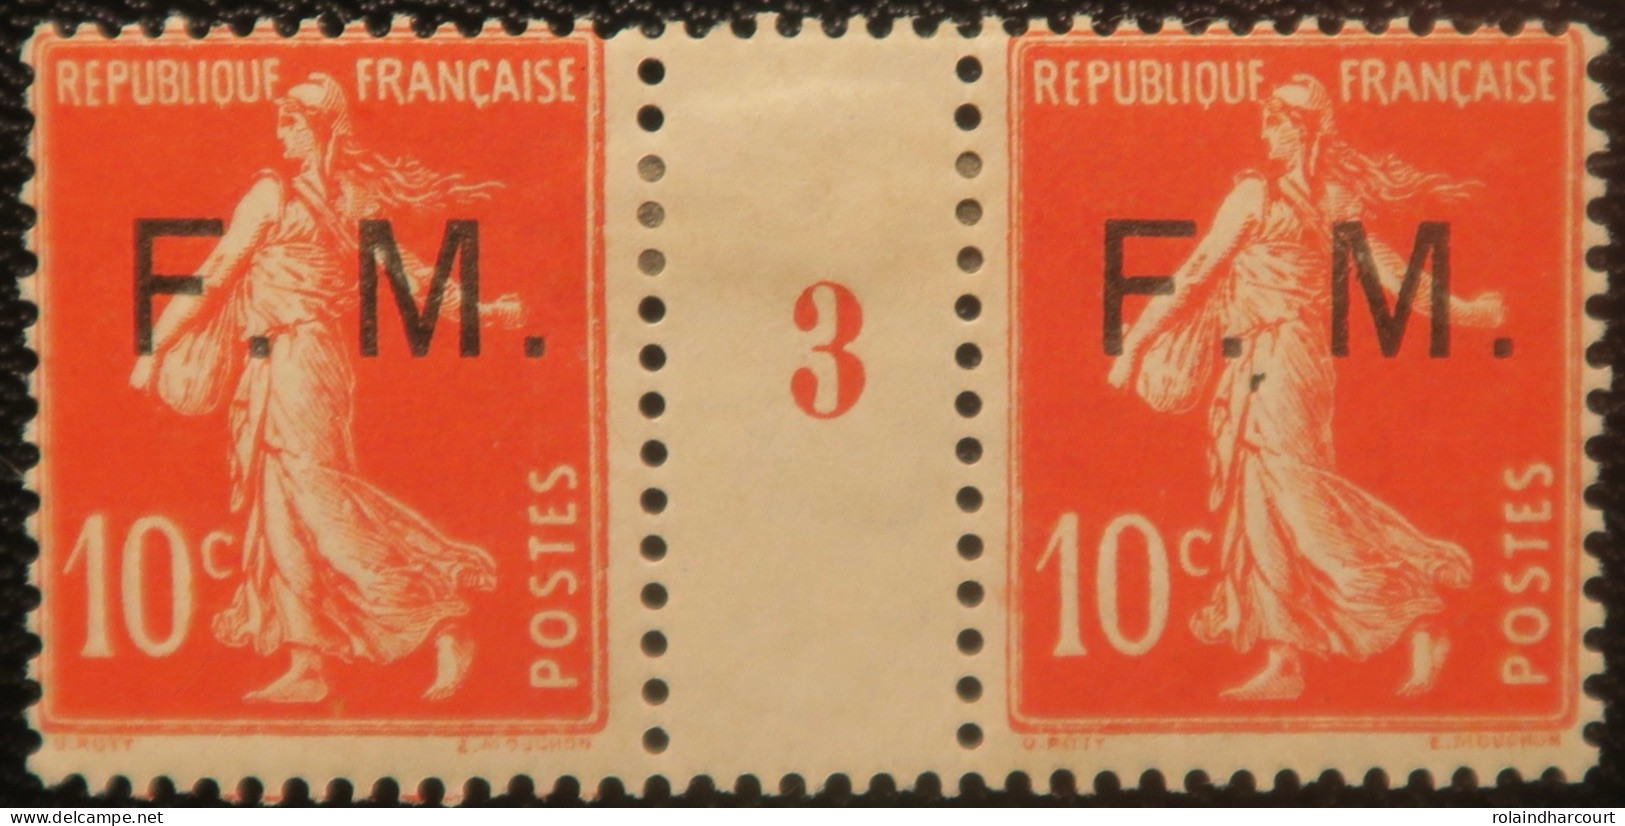 LP2943/83 - FRANCE - 1913 - TYPE SEMEUSE CAMEE - F.M. - N°5 Mill 3 TIMBRES NEUFS* - Millesimes